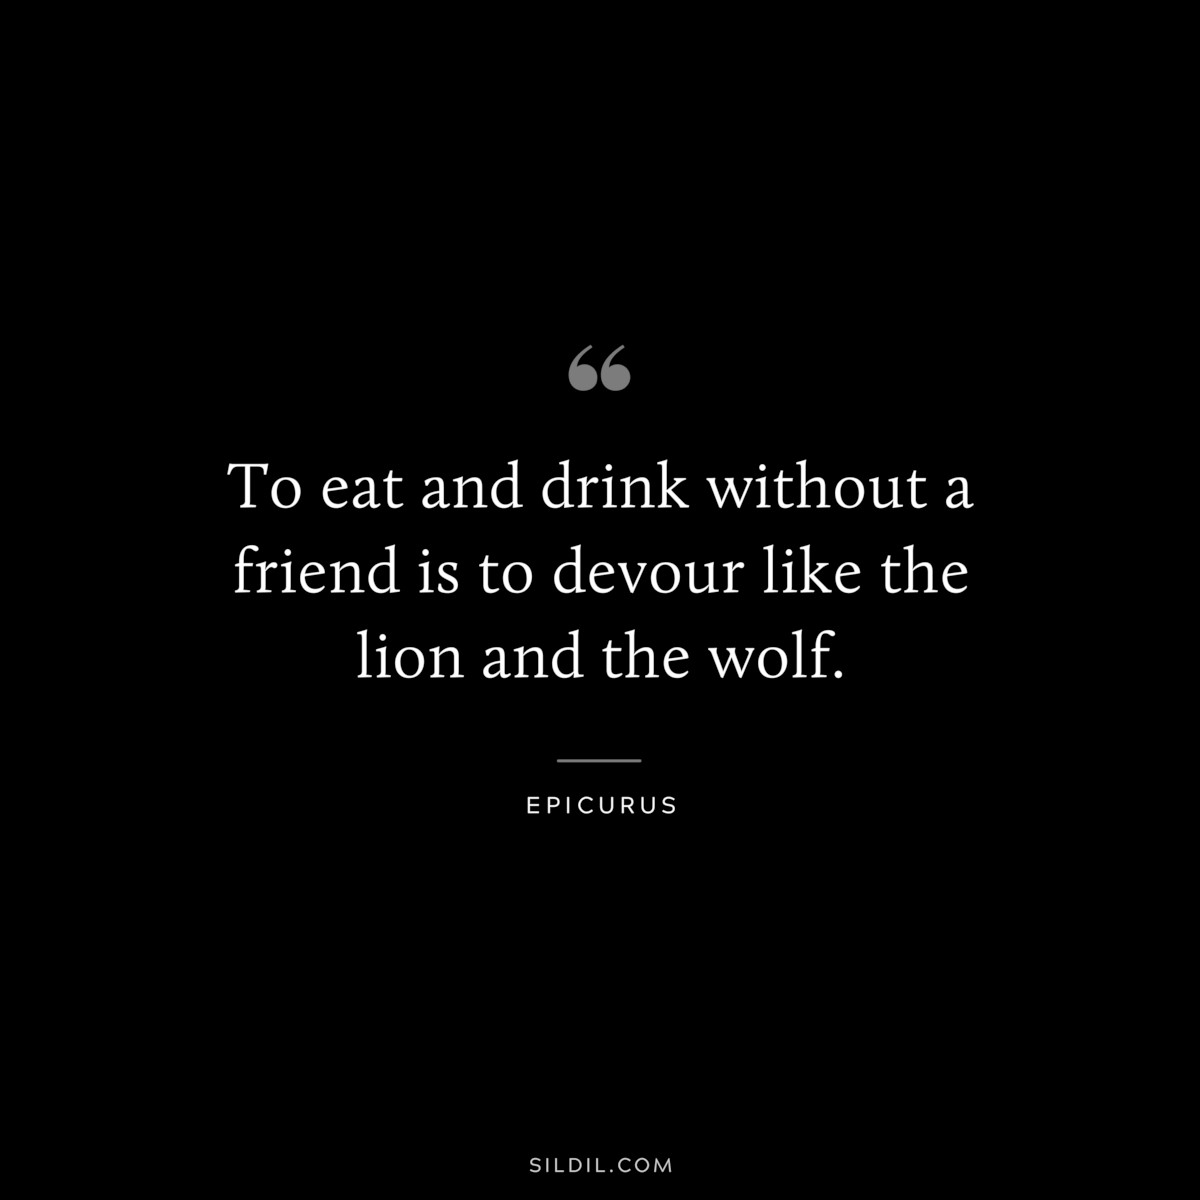 To eat and drink without a friend is to devour like the lion and the wolf. — Epicurus